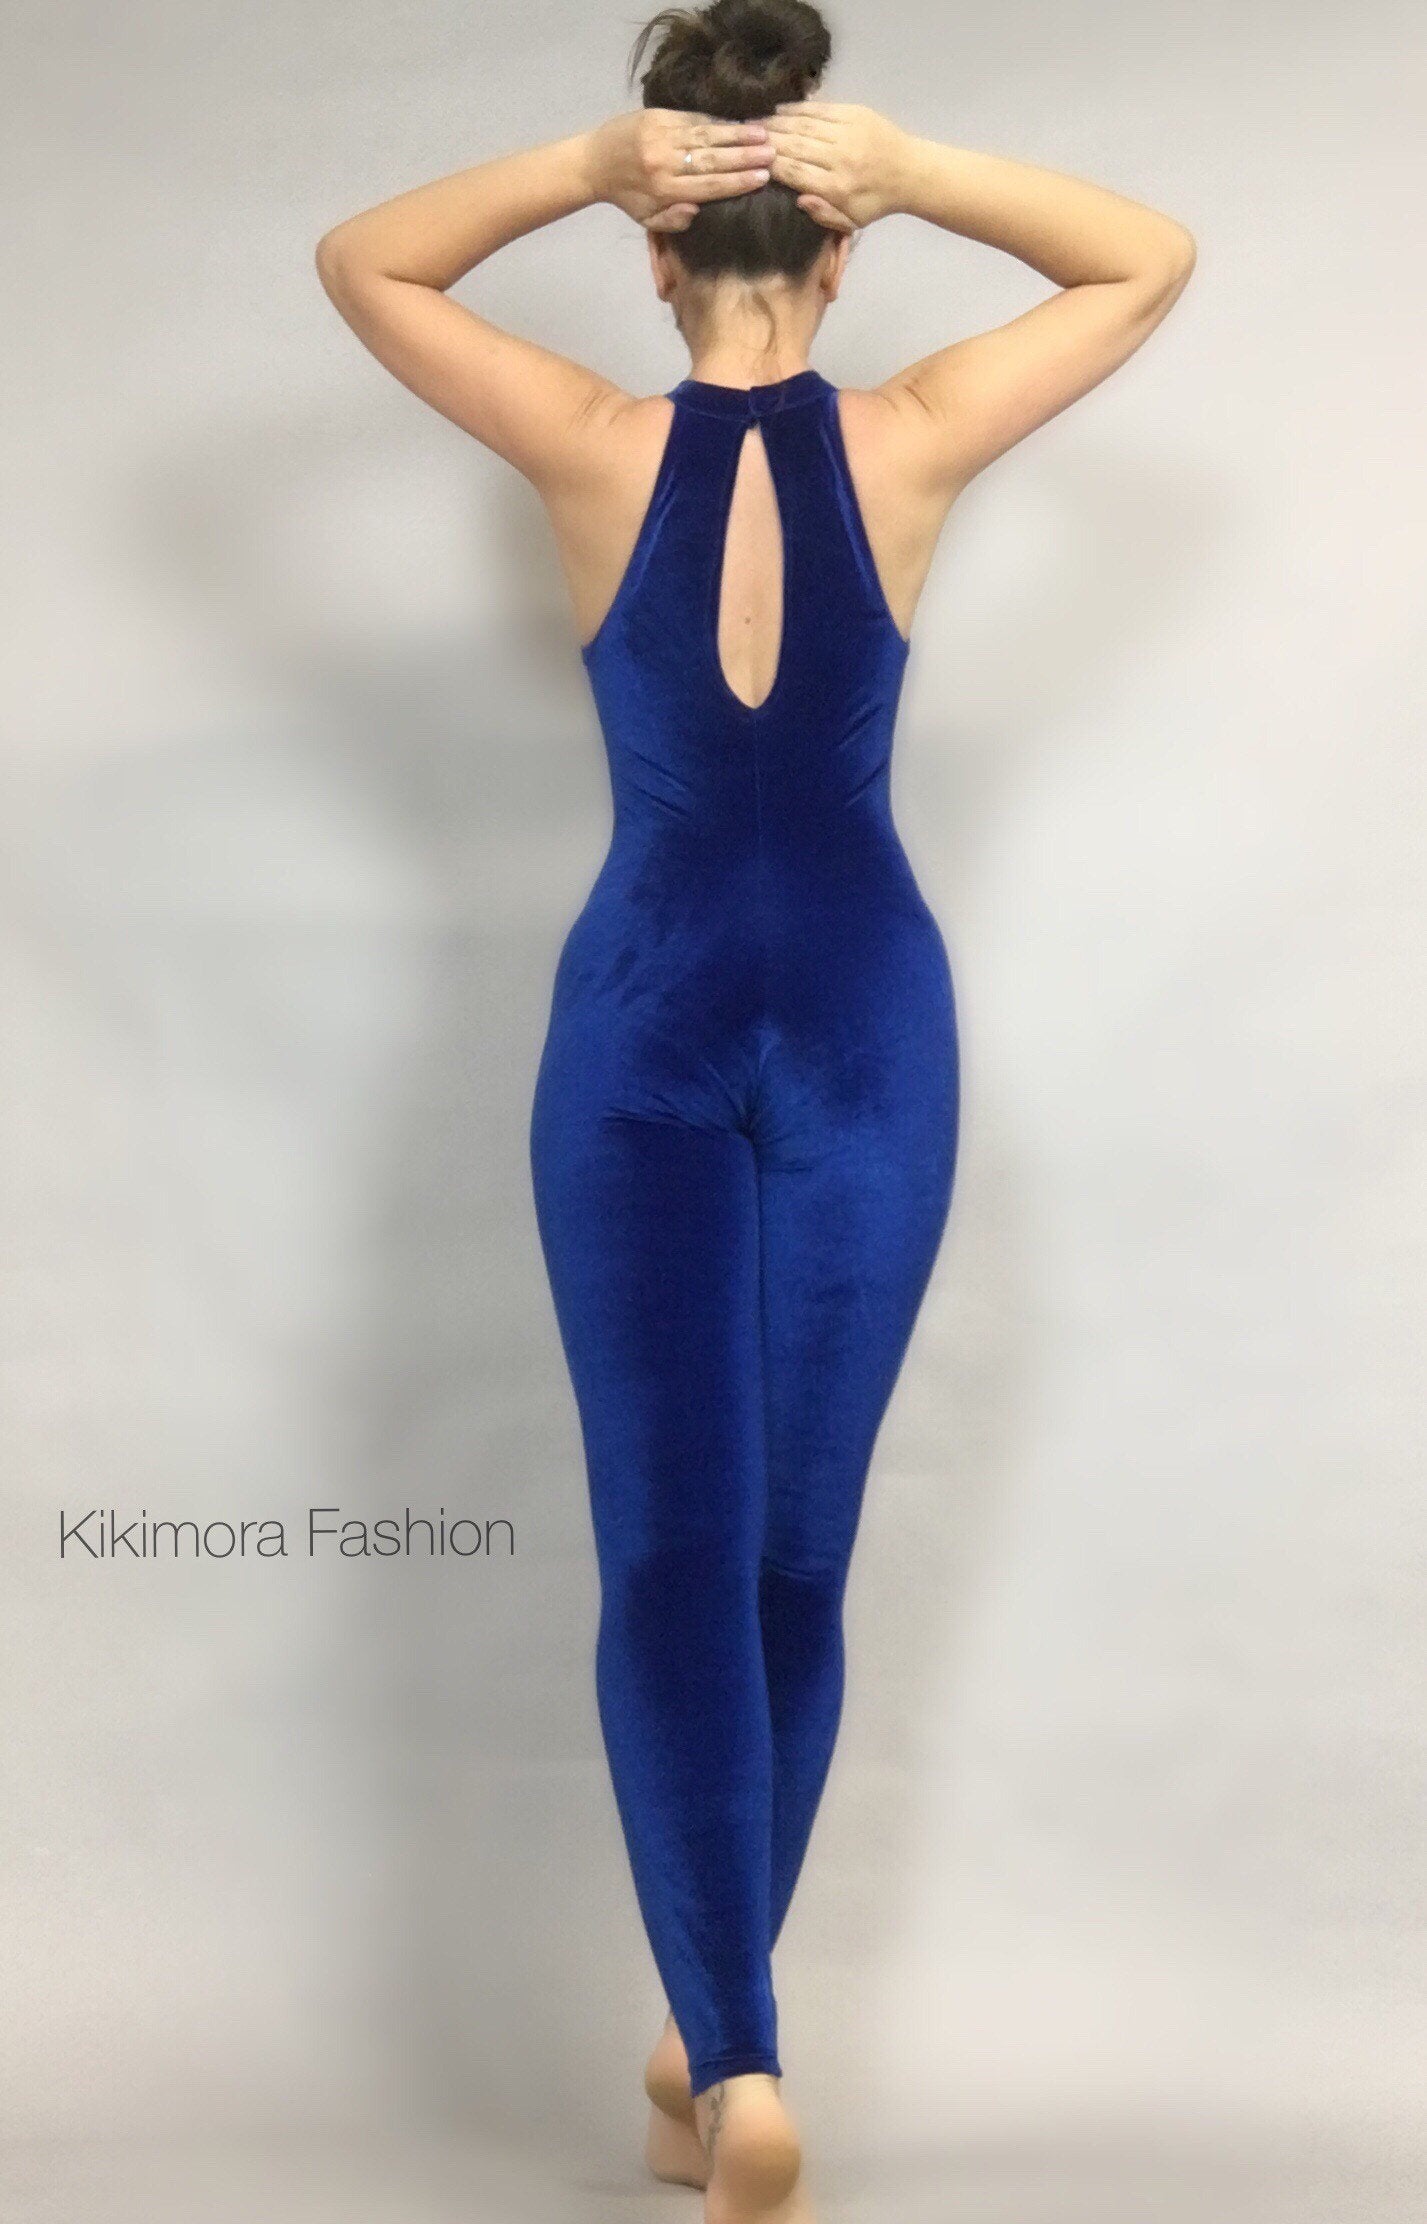 Velvet Bodysuit for Women, Catsuit Costume for Gymnasts, Dancers, and Fitness Performers